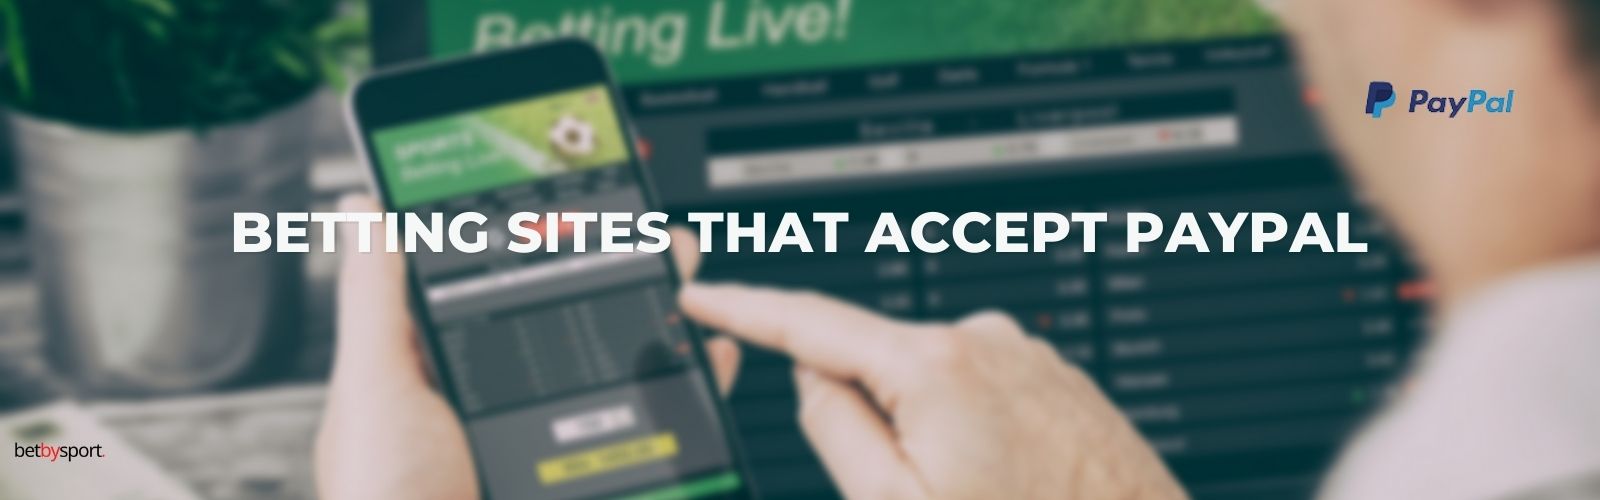 Betting Sites that Accept Paypal